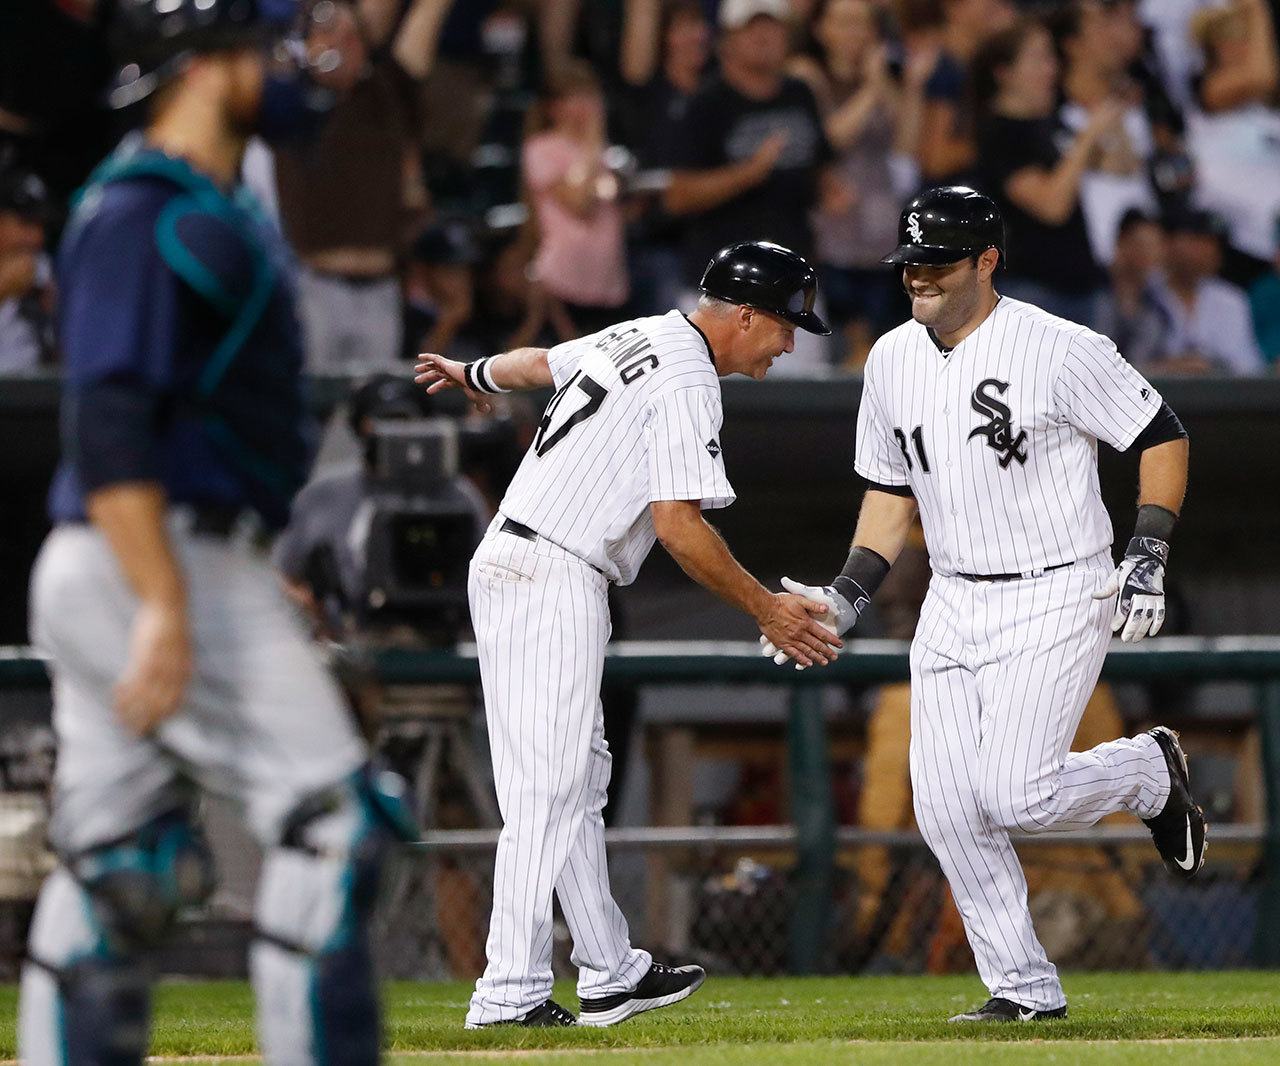 The White Sox’ Alex Avila (right) celebrates with third base coach Joe McEwing after hitting a home run off the Mariners’ Vidal Nuno during the fifth inning of a game Saturday in Chicago. (AP Photo/Kamil Krzaczynski)